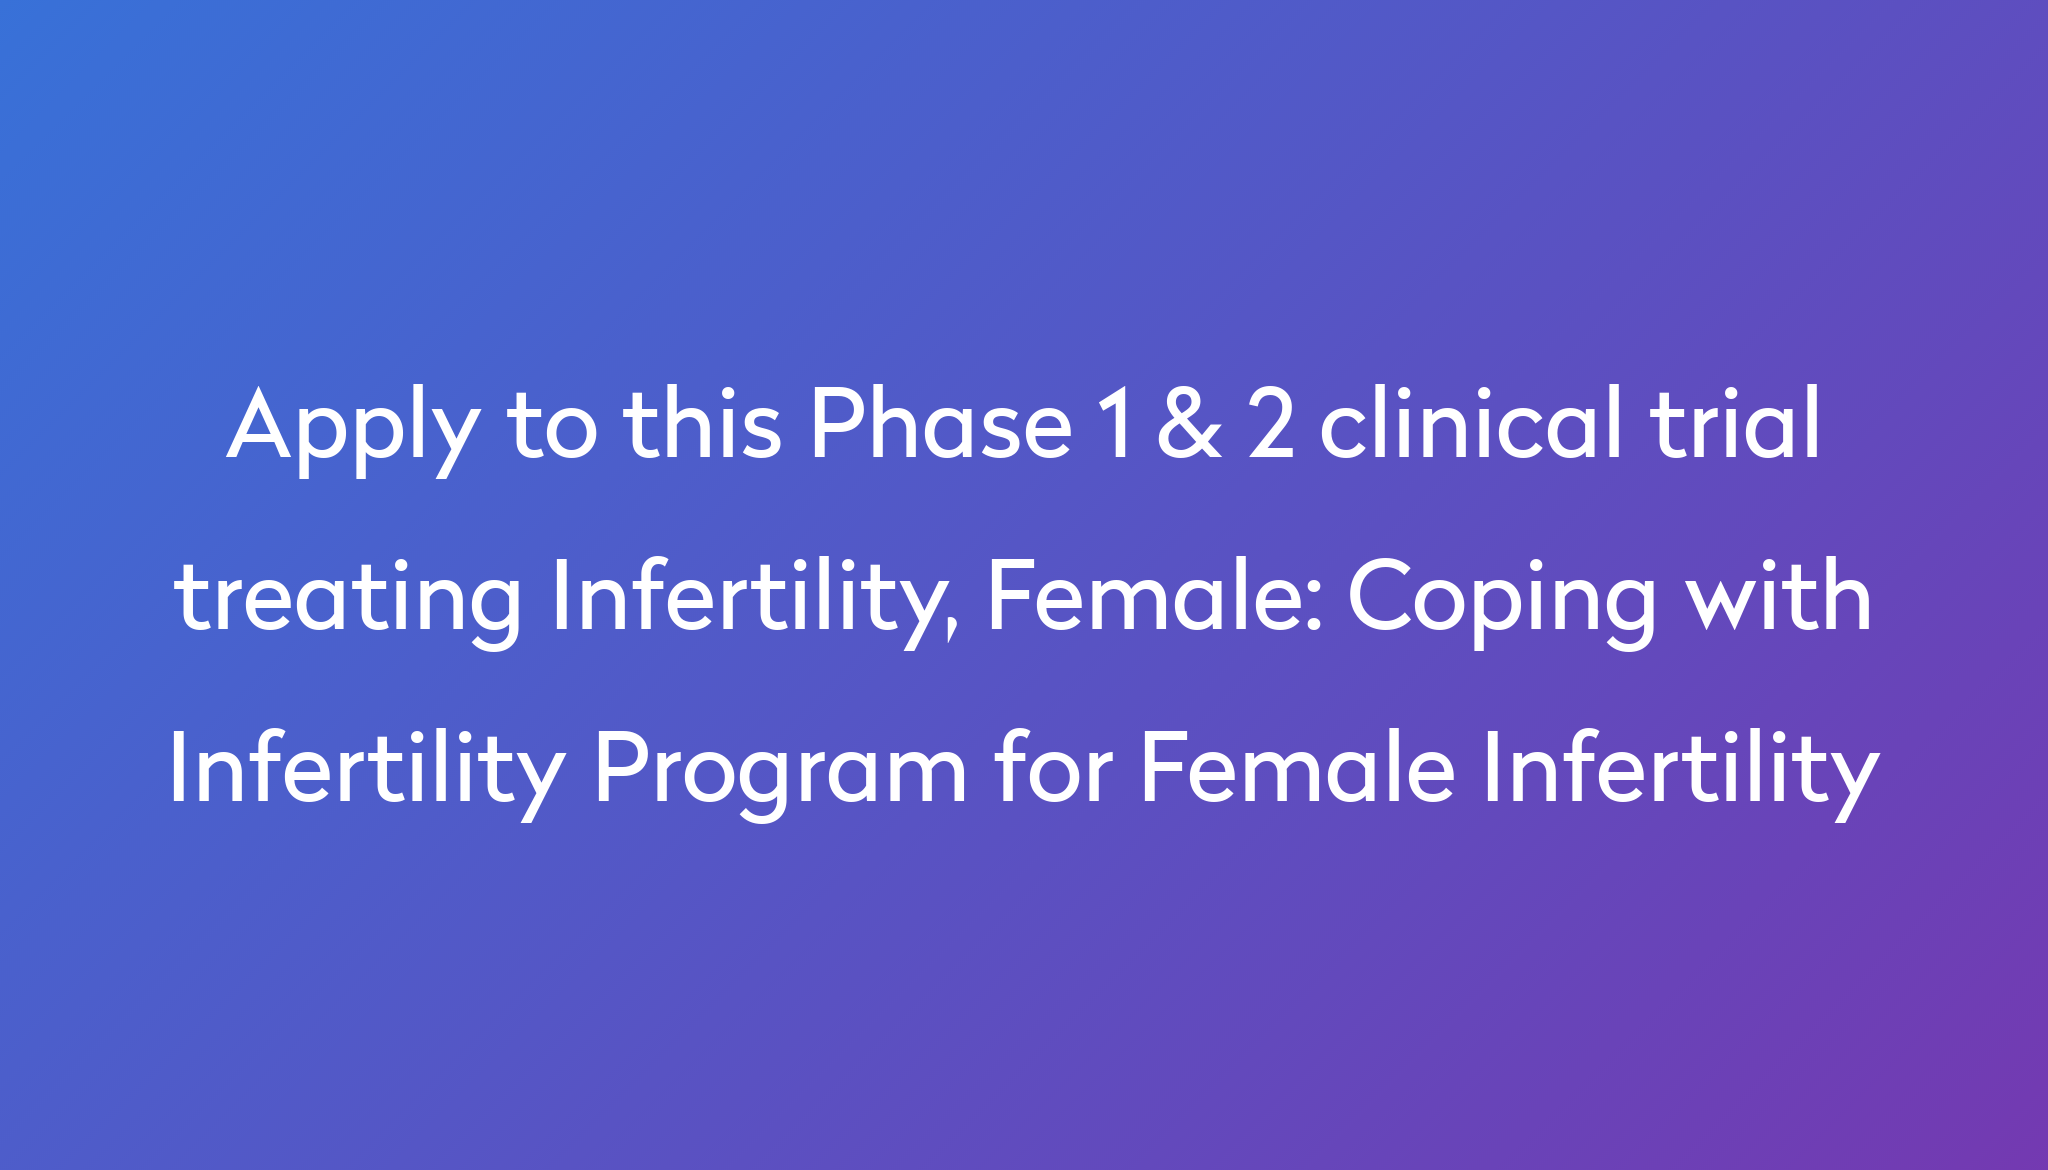 Coping with Infertility Program for Female Infertility Clinical Trial